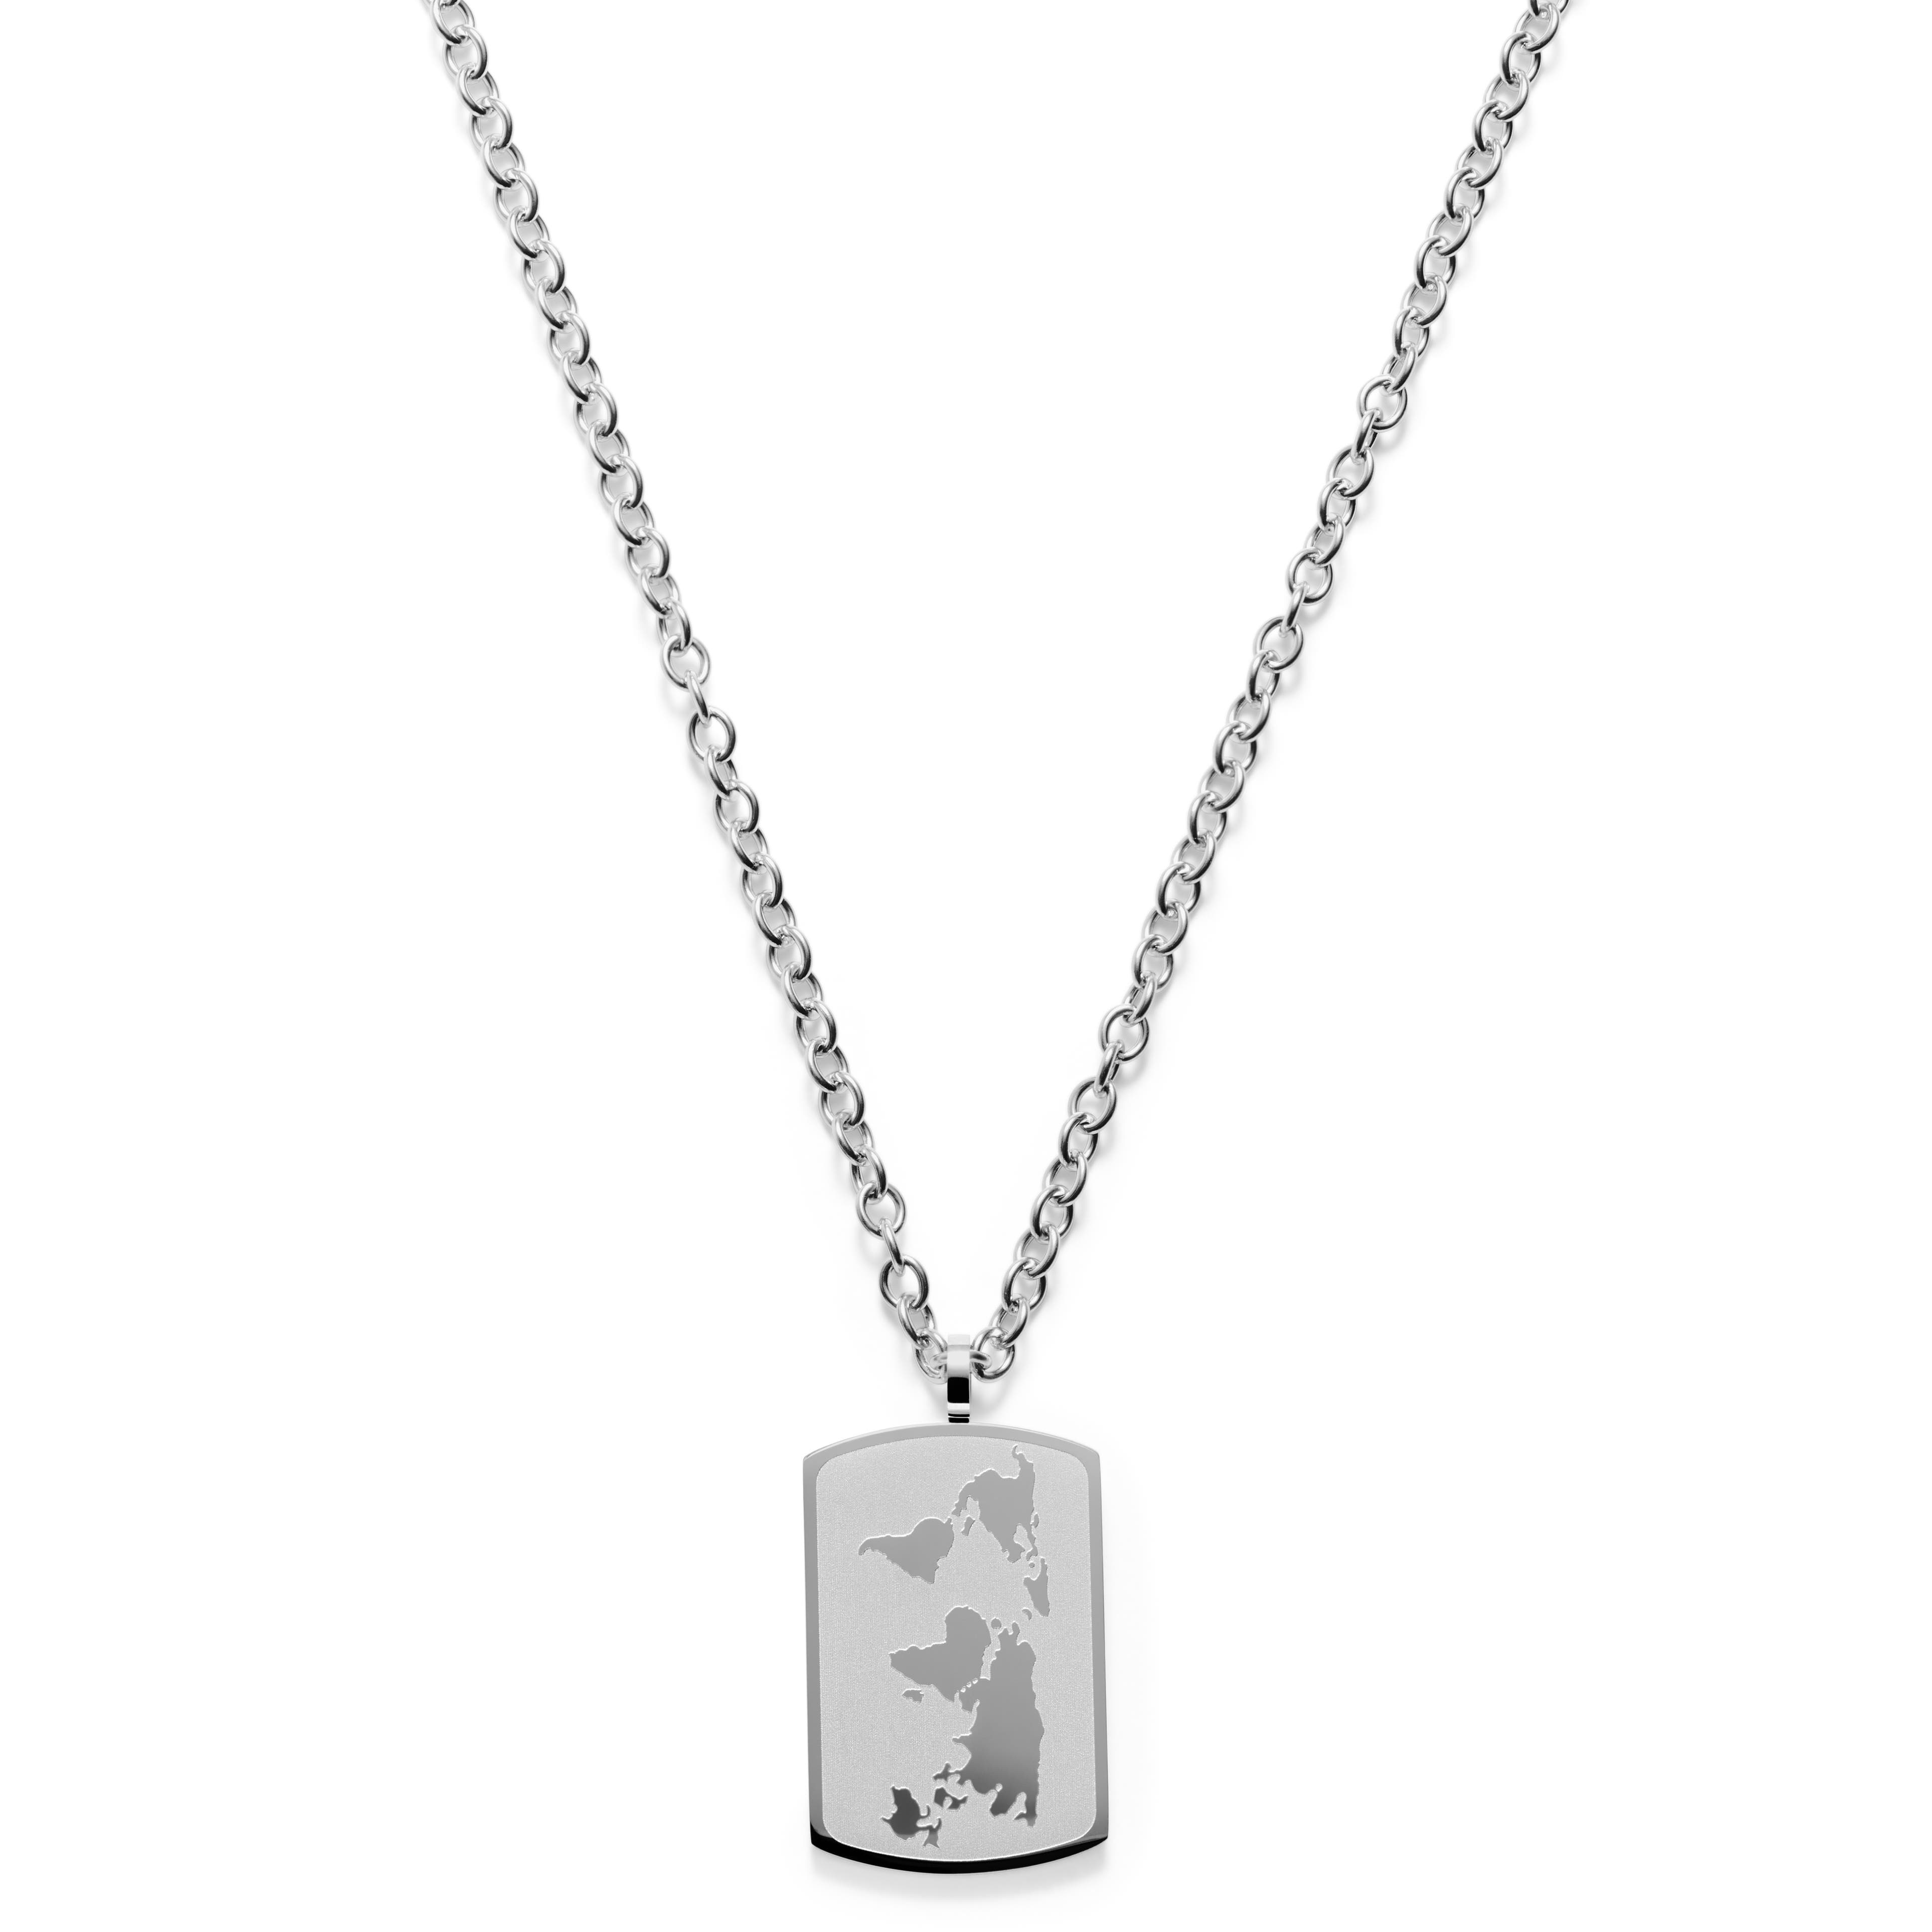 Silver-Tone Stainless Steel World Map Cable Chain Necklace